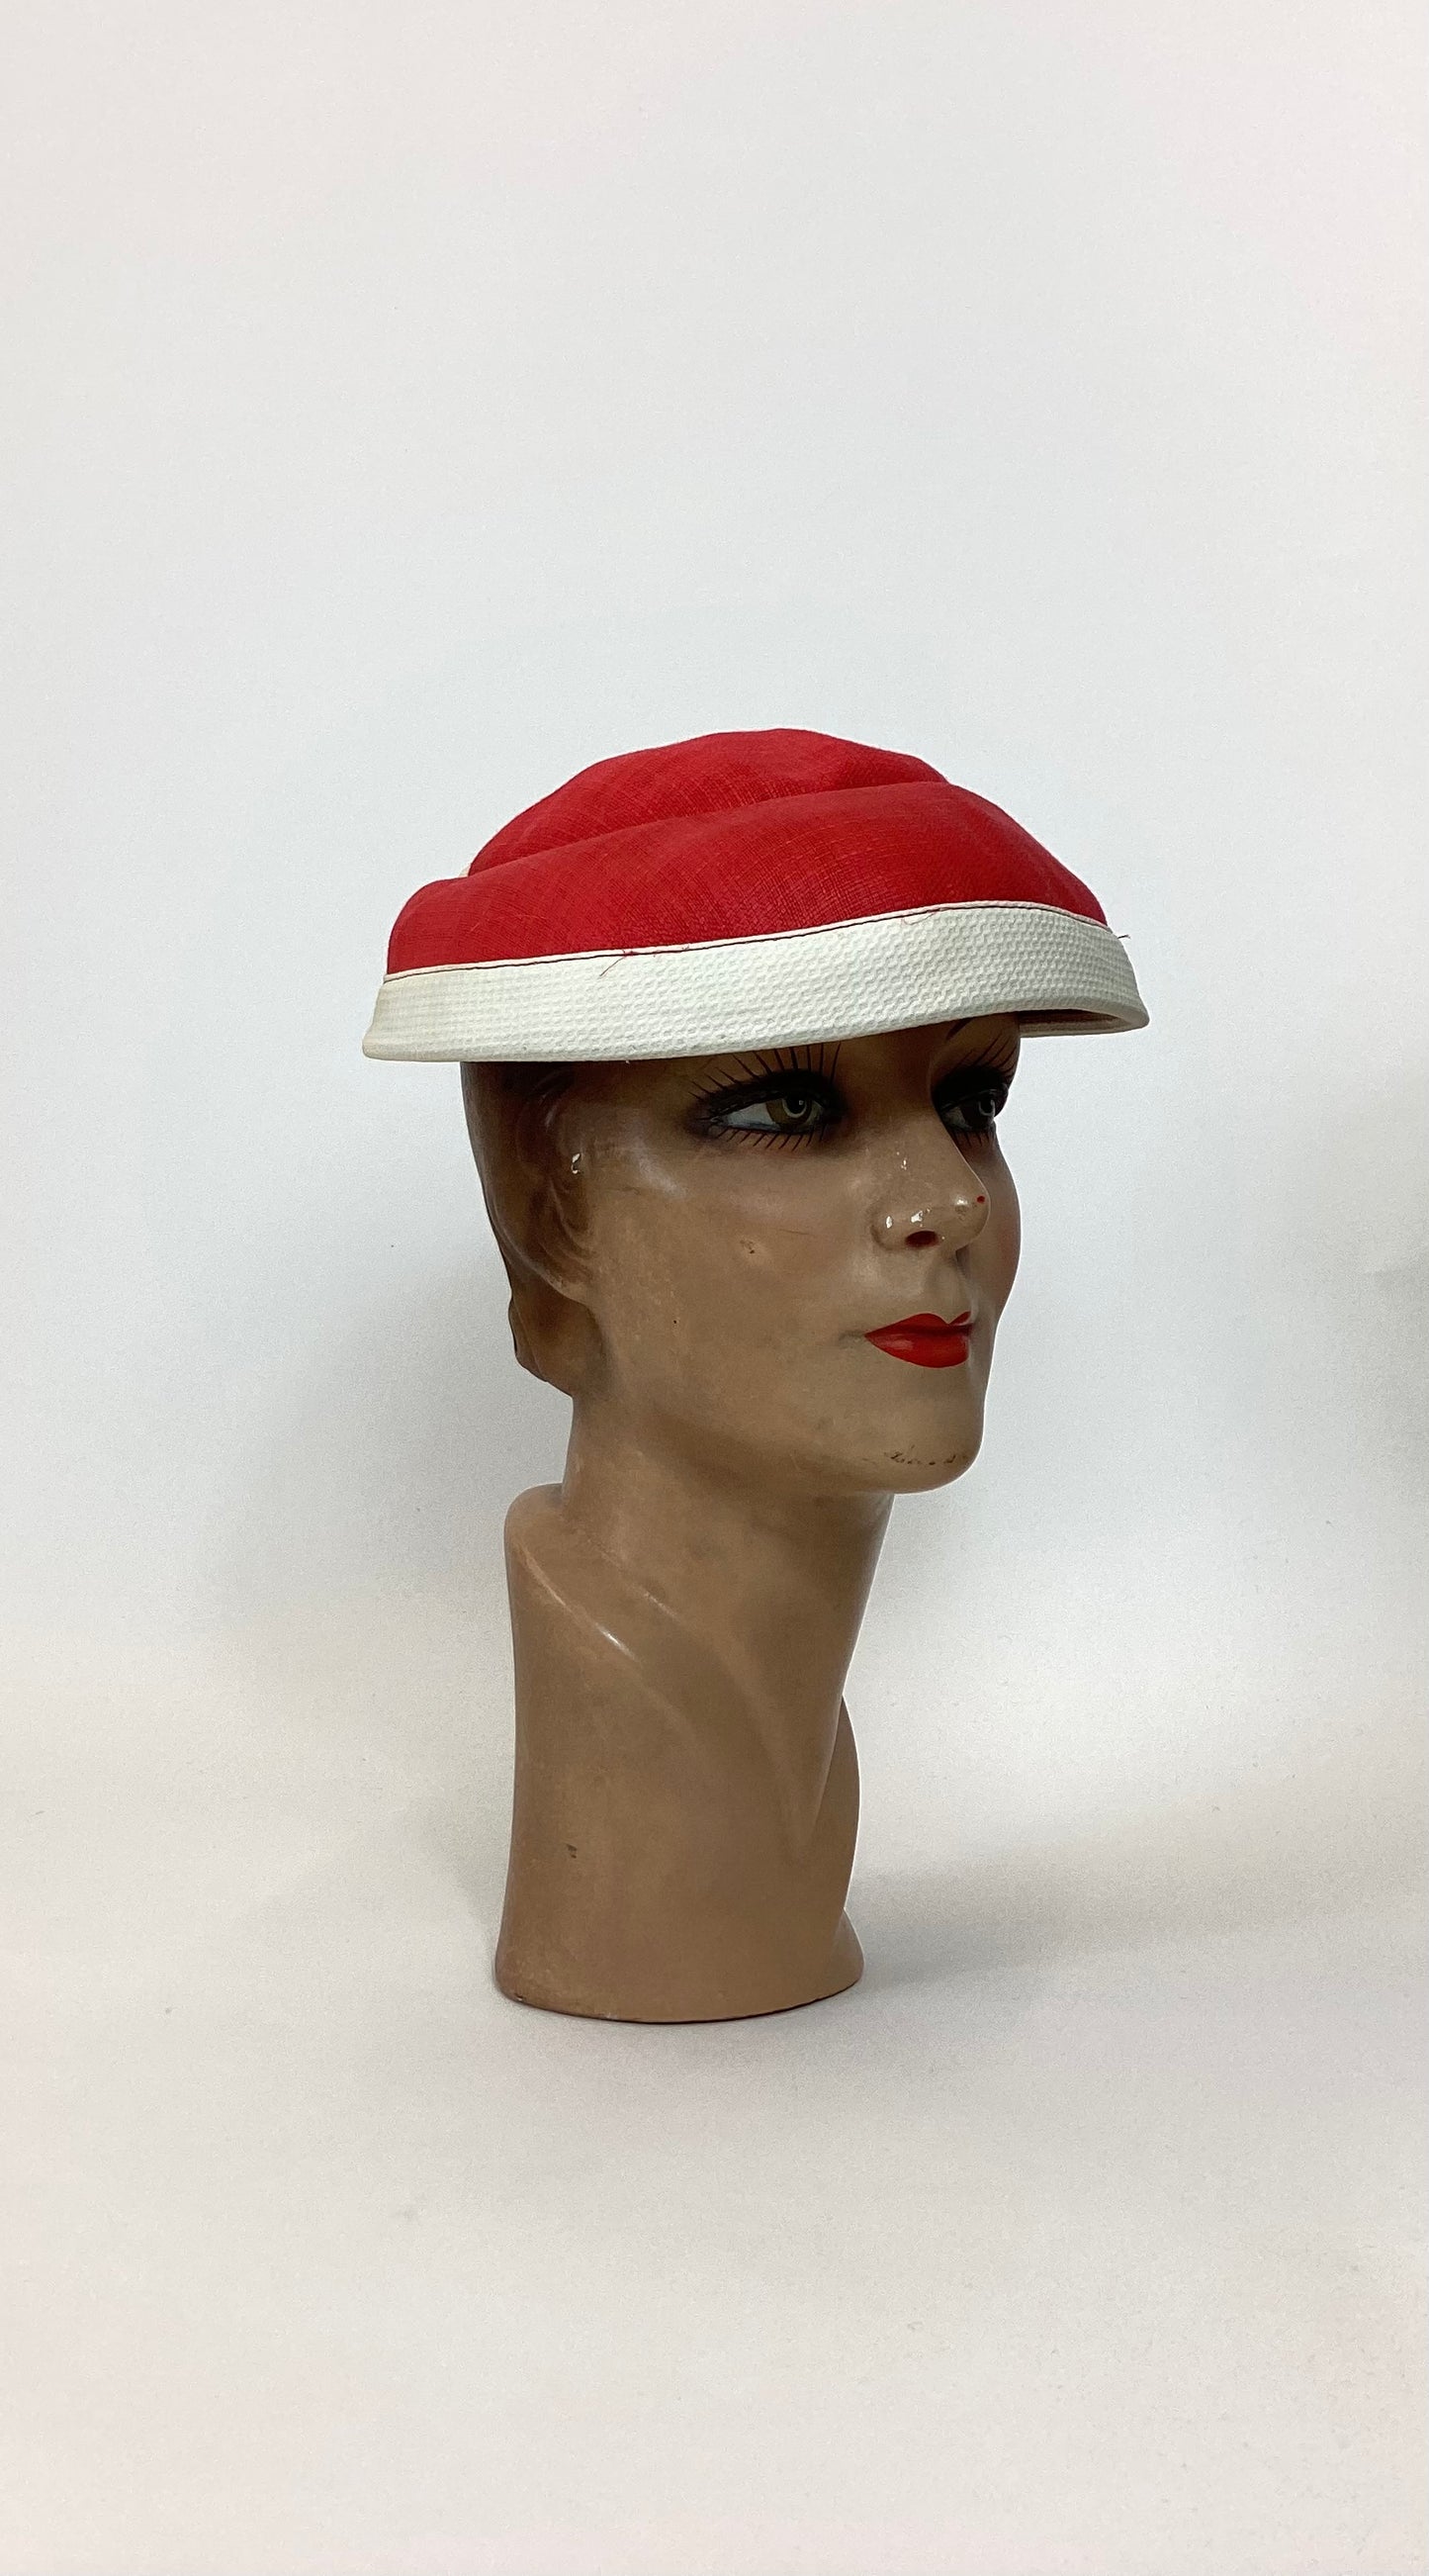 Original 50’s Fabulous Hat - Lipstick Red and Ivory contrast.